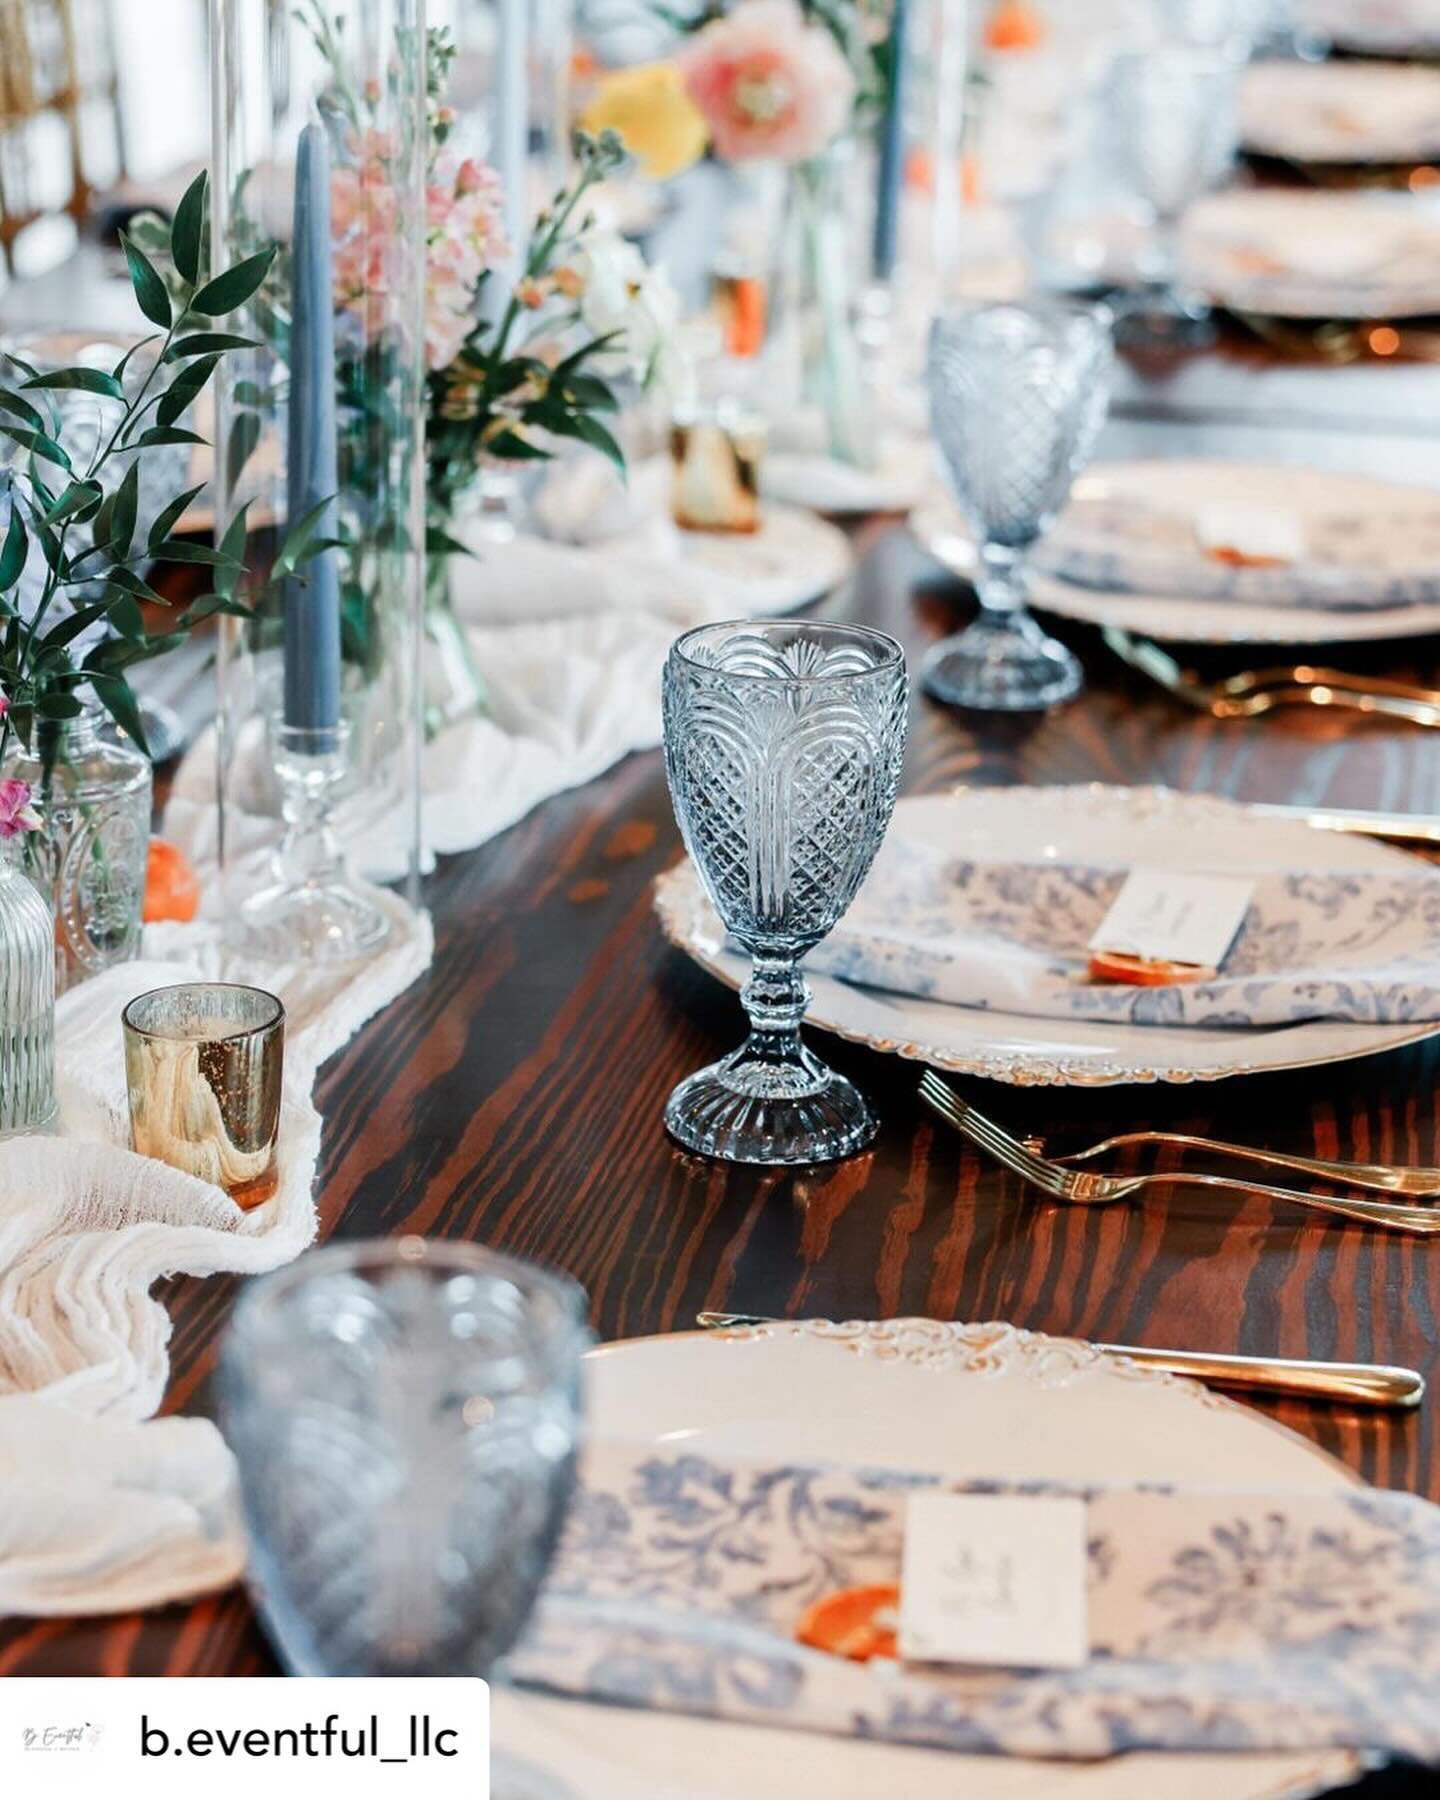 Still obsessed with this stunning spring wedding! We&rsquo;ve always adored the texture of our farm tables in the modern setting of the Tampa River Center, but these tablescapes take it to a whole new level! Thanks to @b.eventful_llc for including us